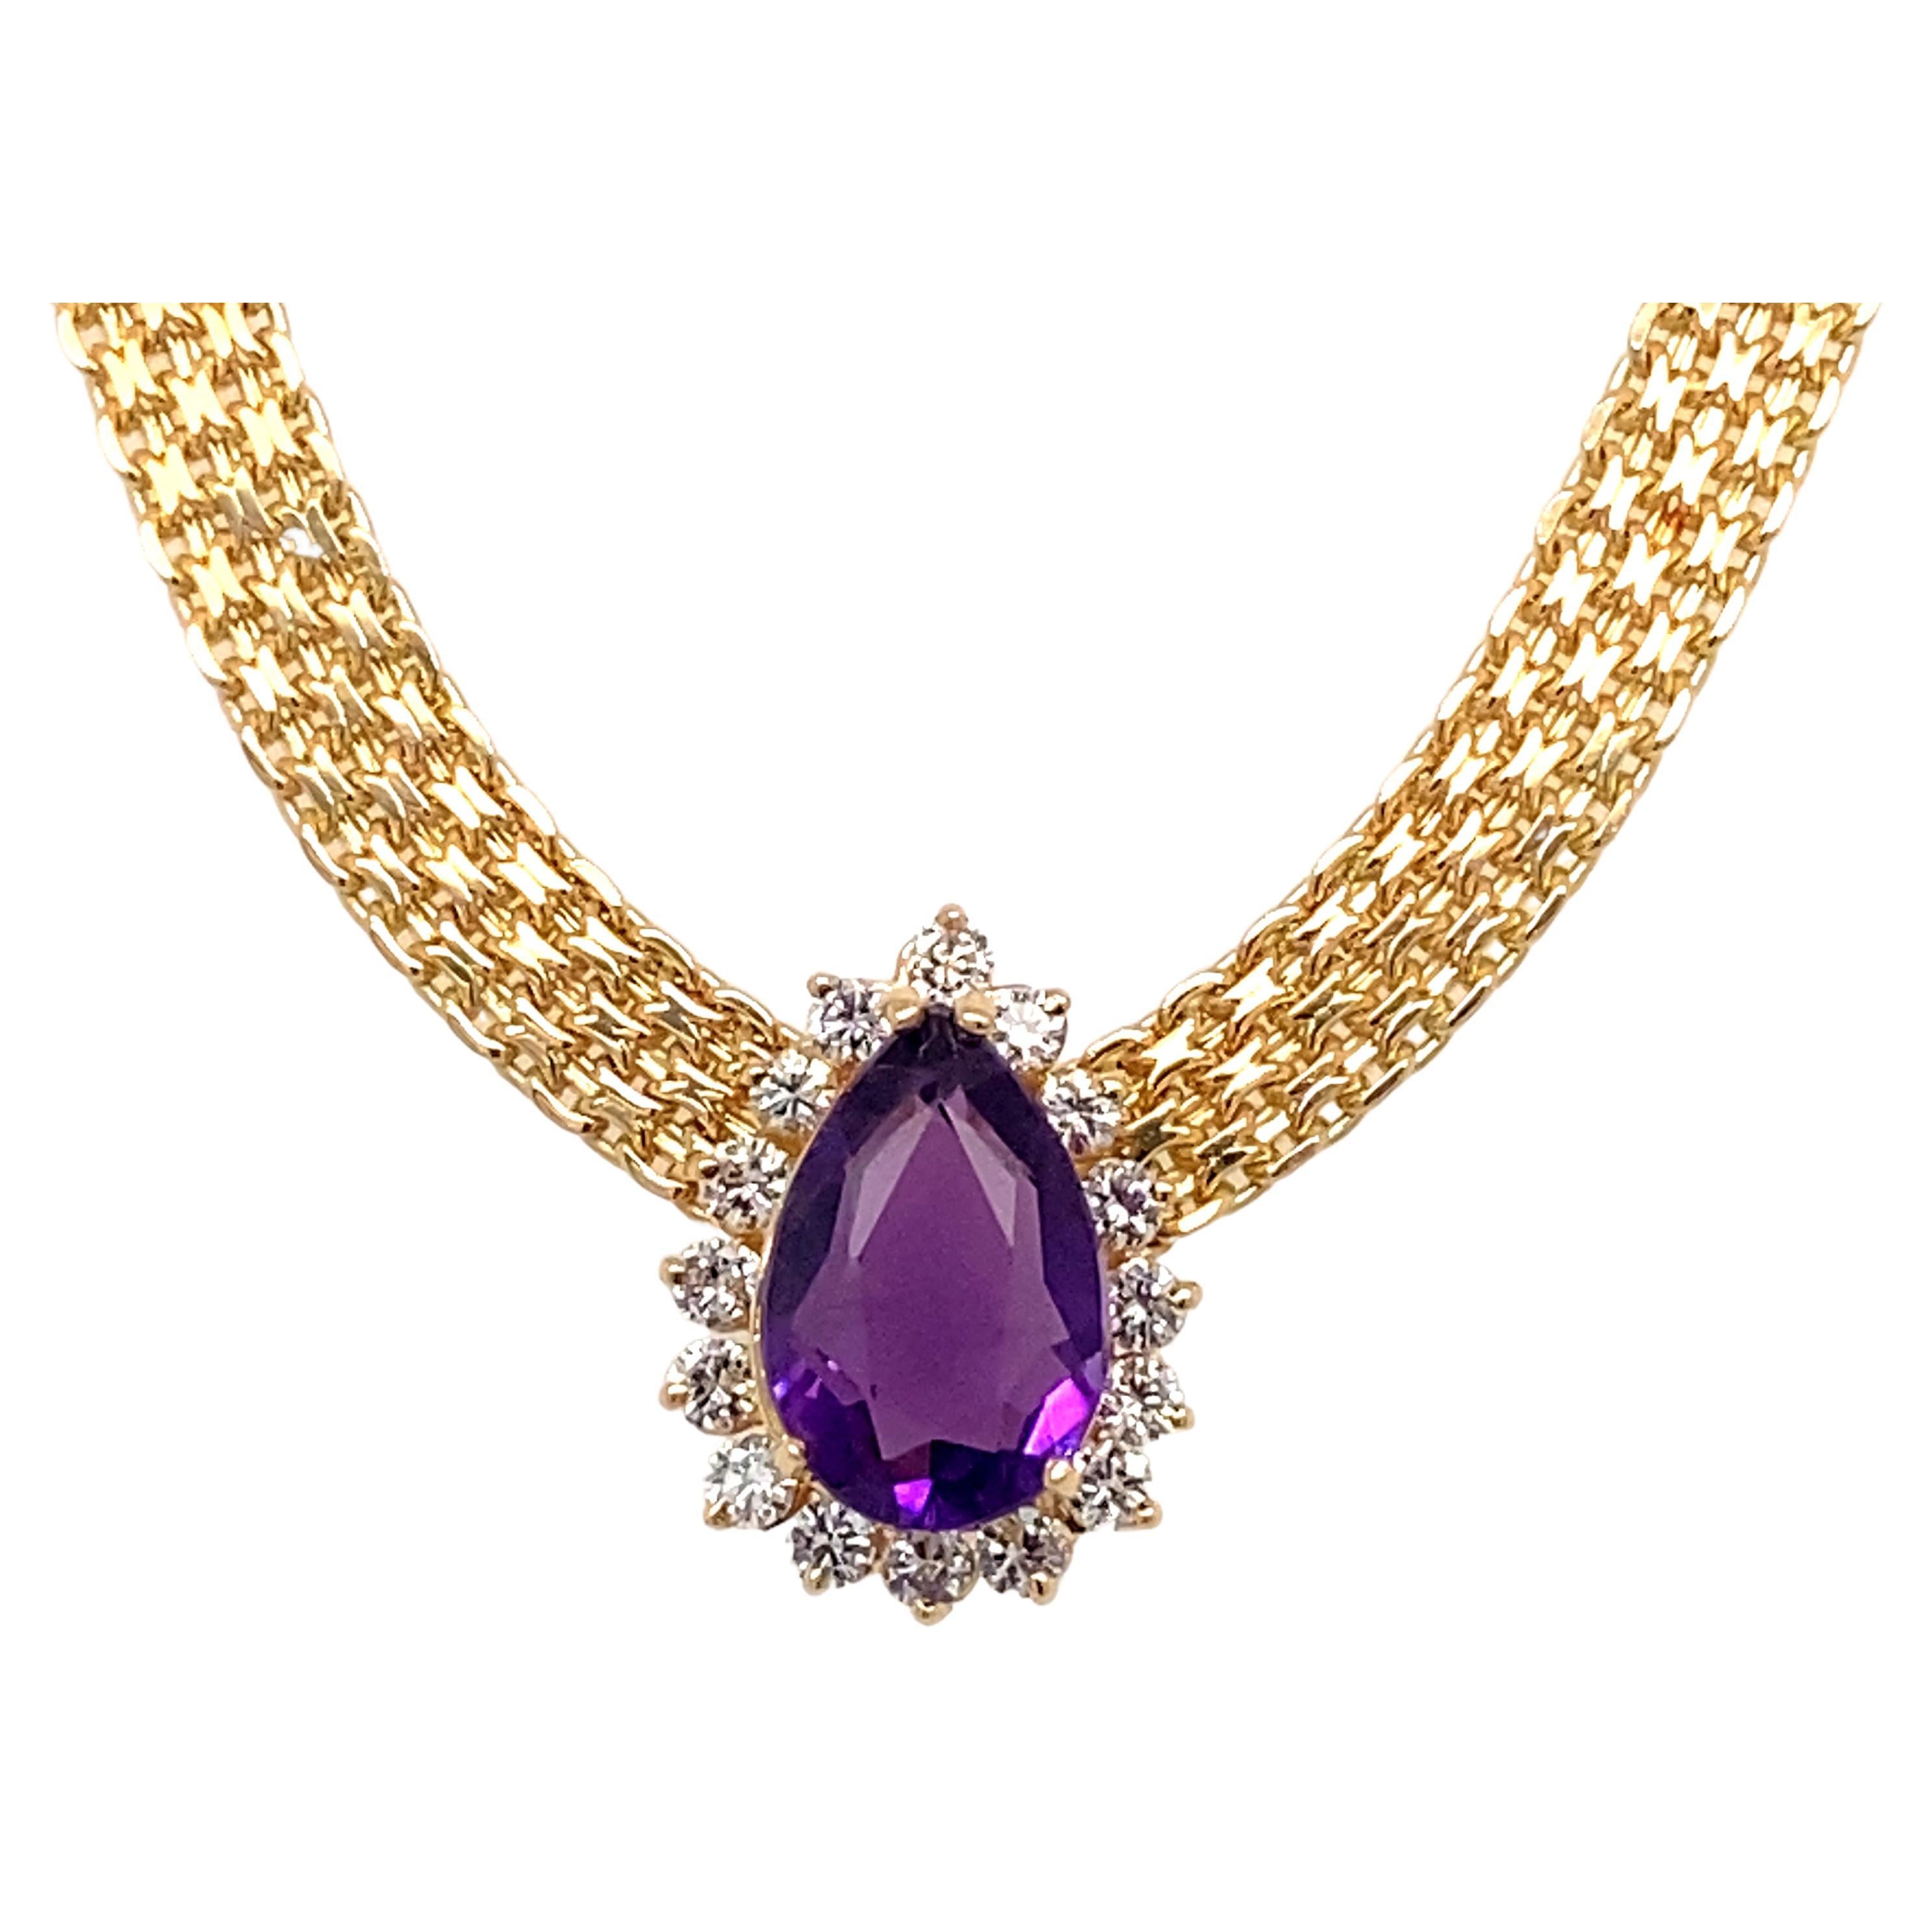 1950s 4 Carat Amethyst and Diamond Halo Necklace in 14 Karat Gold